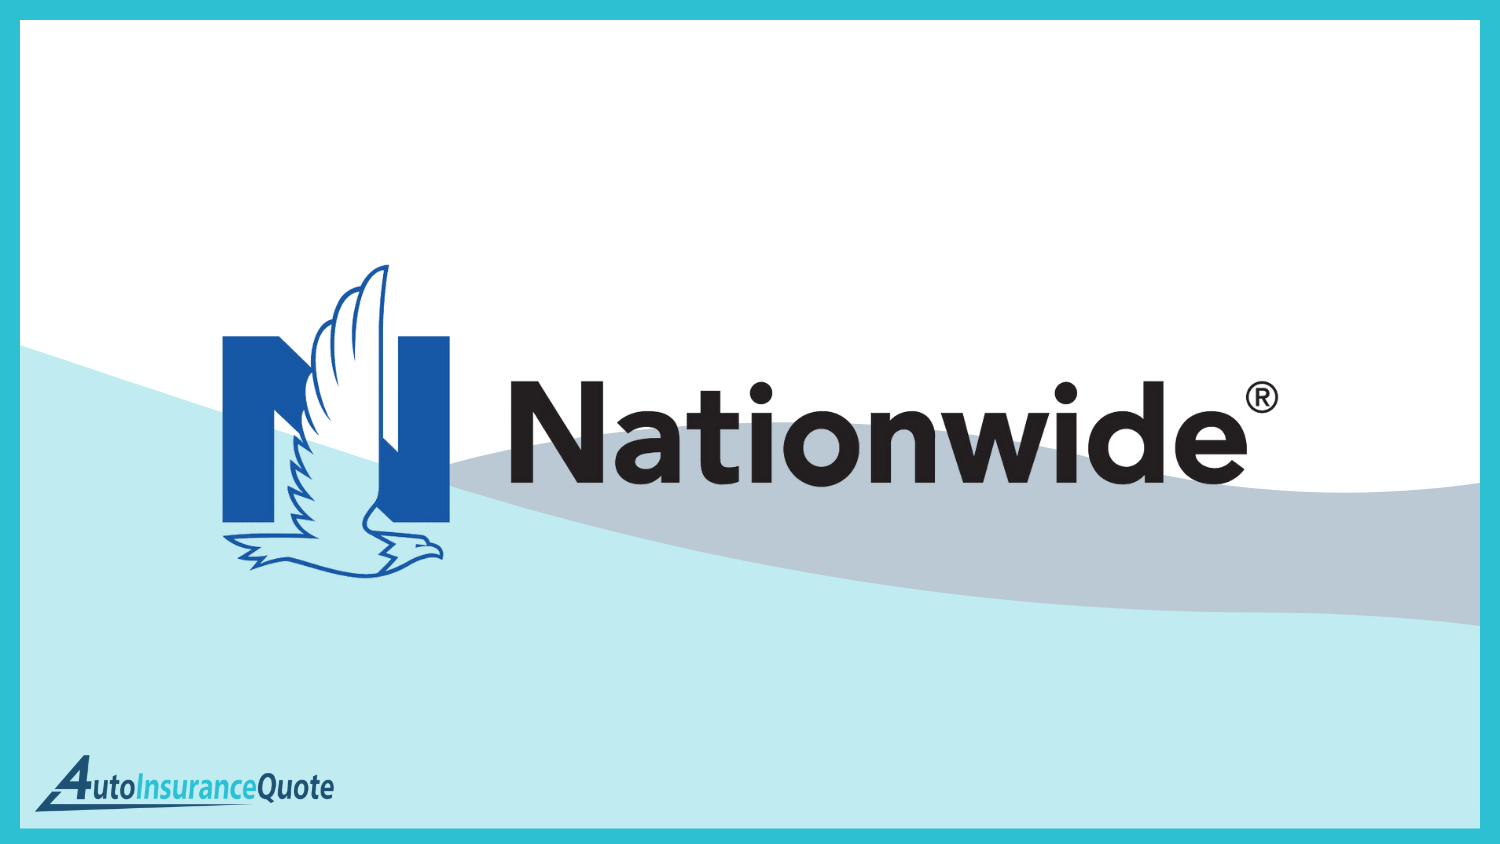 Nationwide: Best Auto Insurance for Government Employees